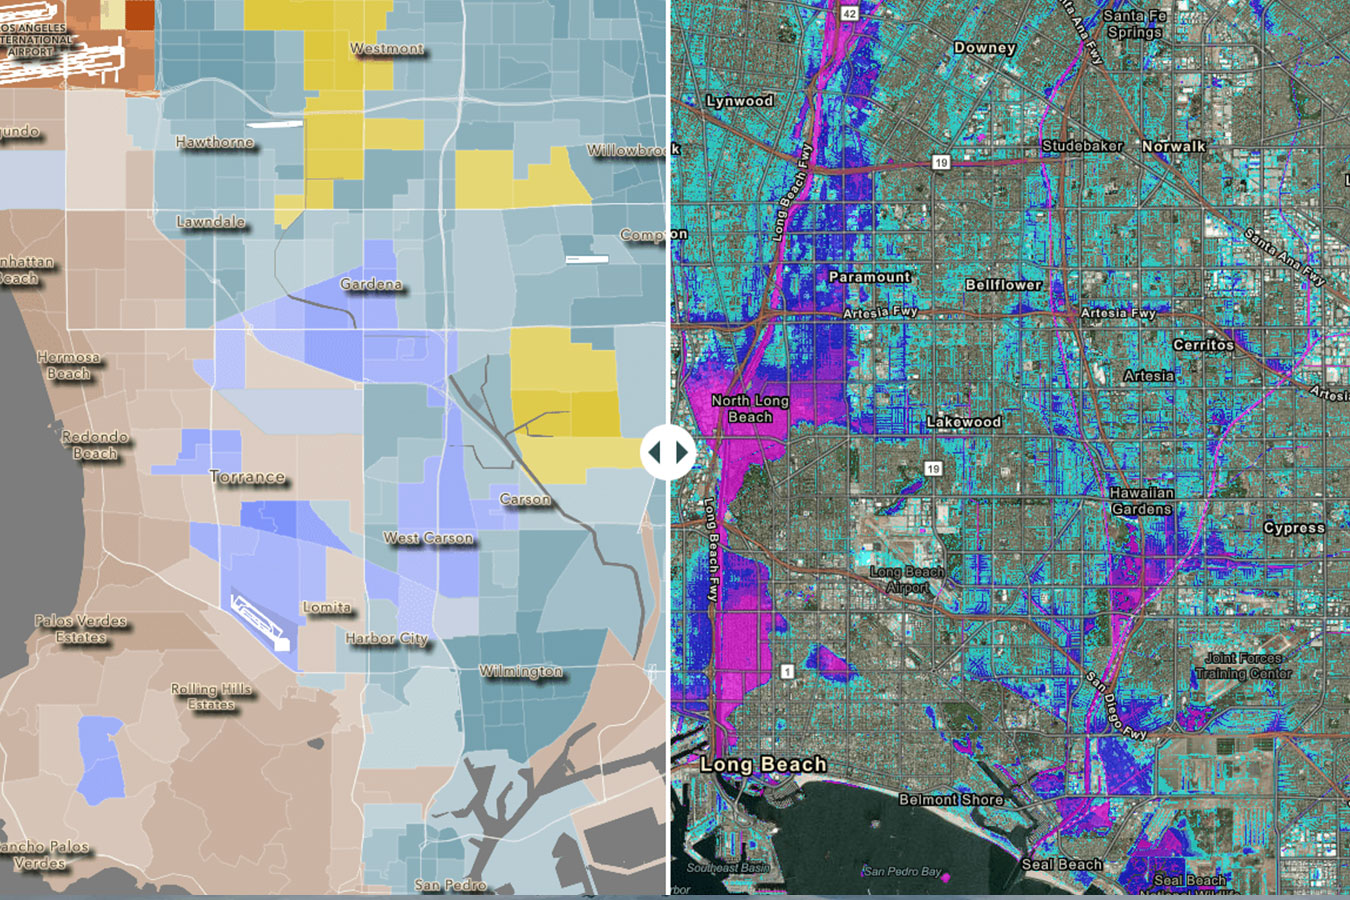 Los Angeles flood risk study maps showing flood depth (right) and the distribution of residents by predominant race/ethnicity (left), October 2022. Credit: University of California, Irvine